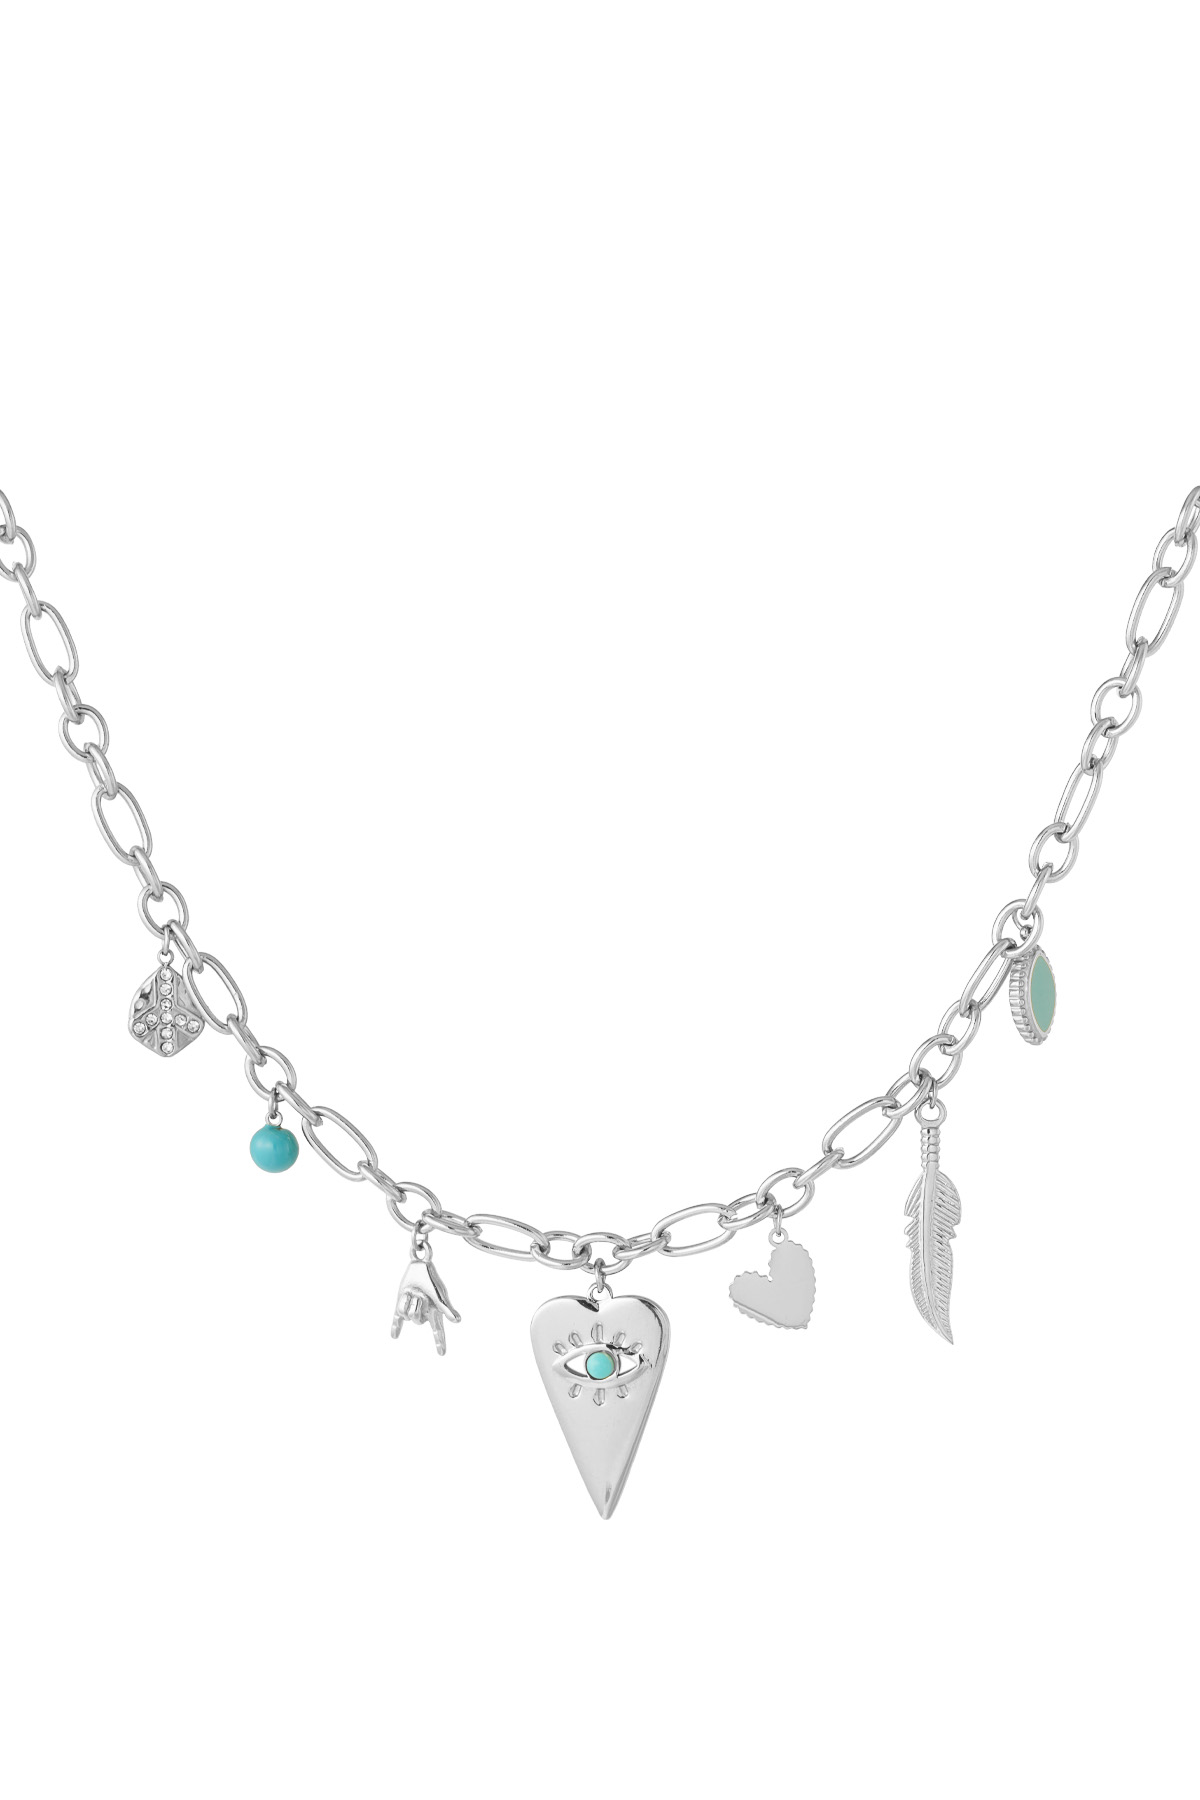 Charm necklace with cheerful charms - silver